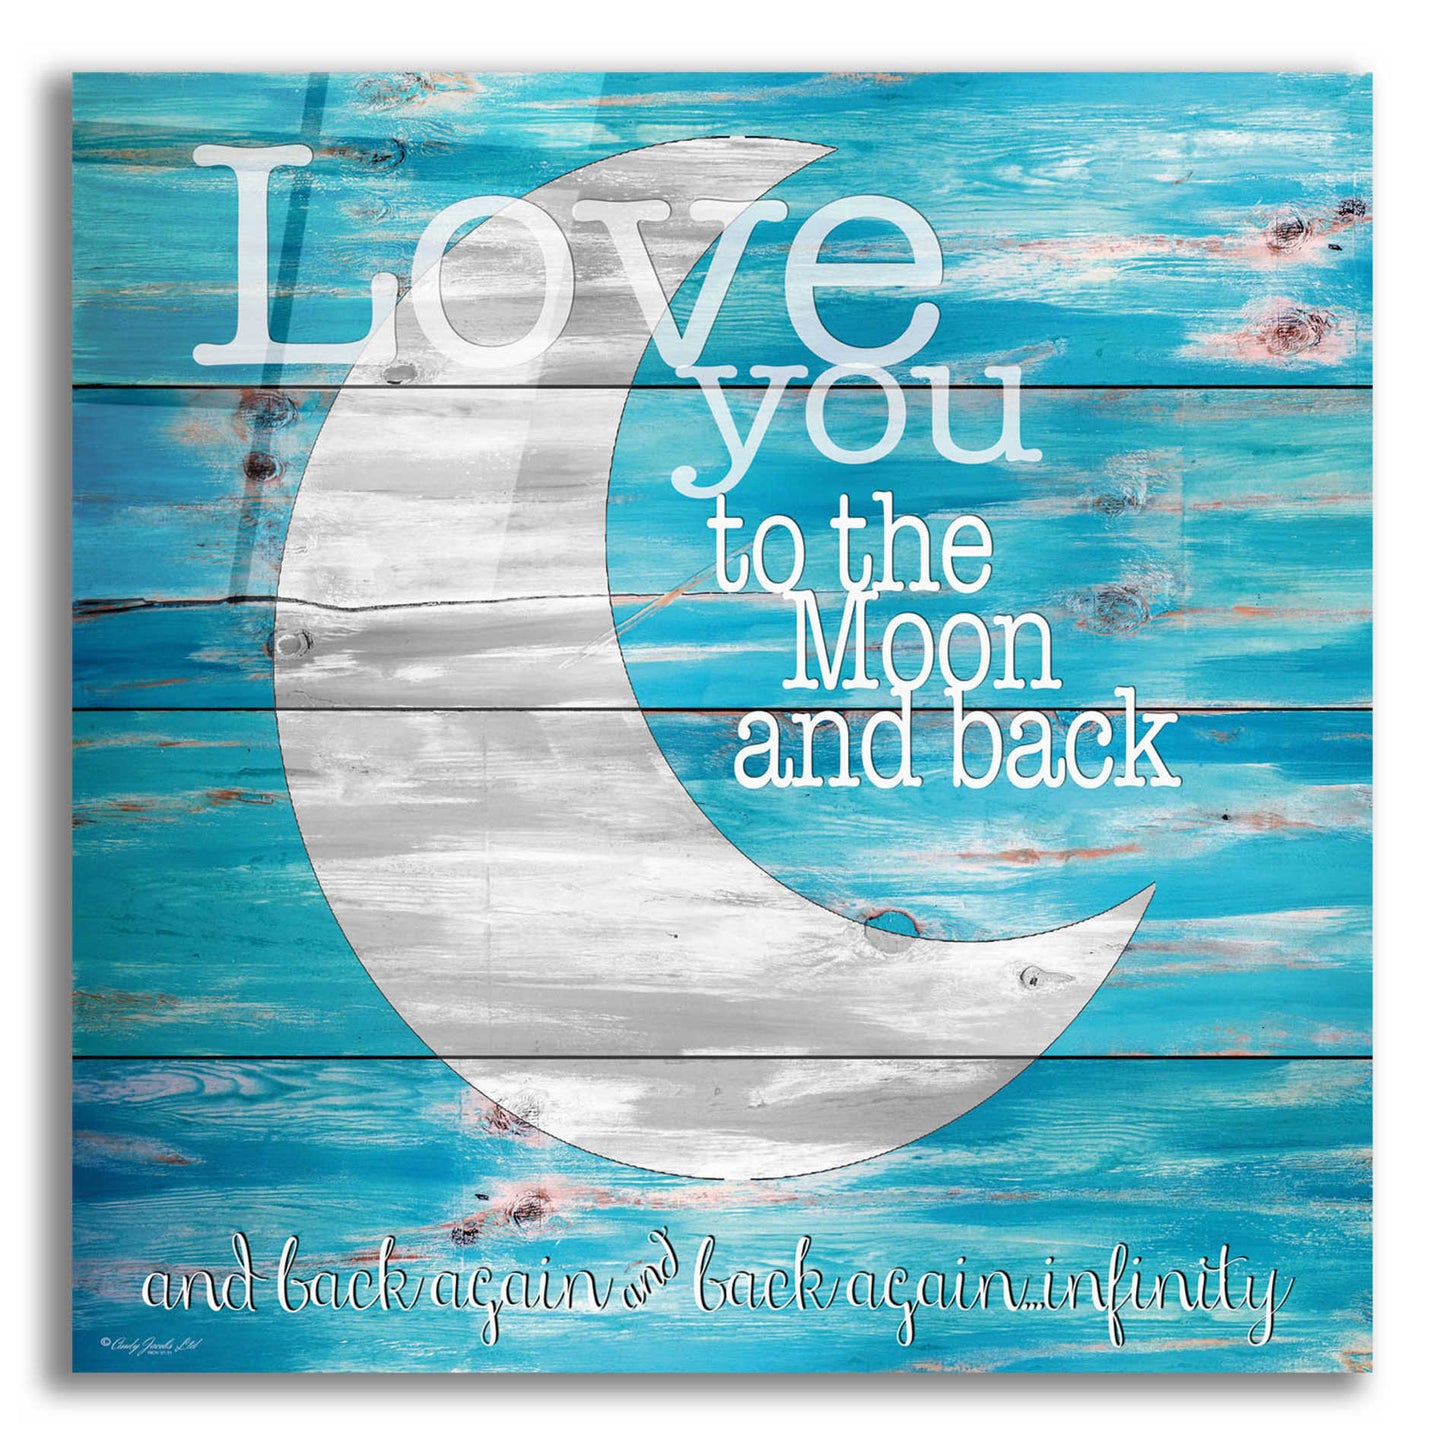 Epic Art 'Love You to the Moon and Back' by Cindy Jacobs, Acrylic Glass Wall Art